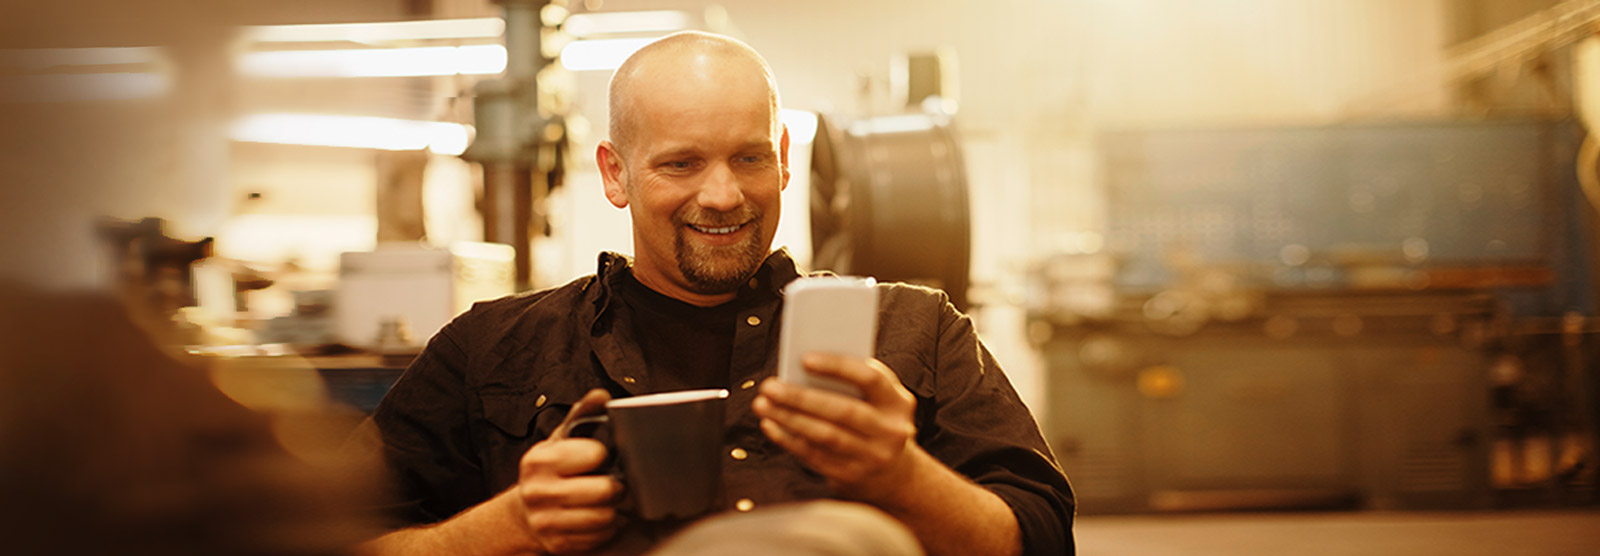 Business owner with coffee checking phone.